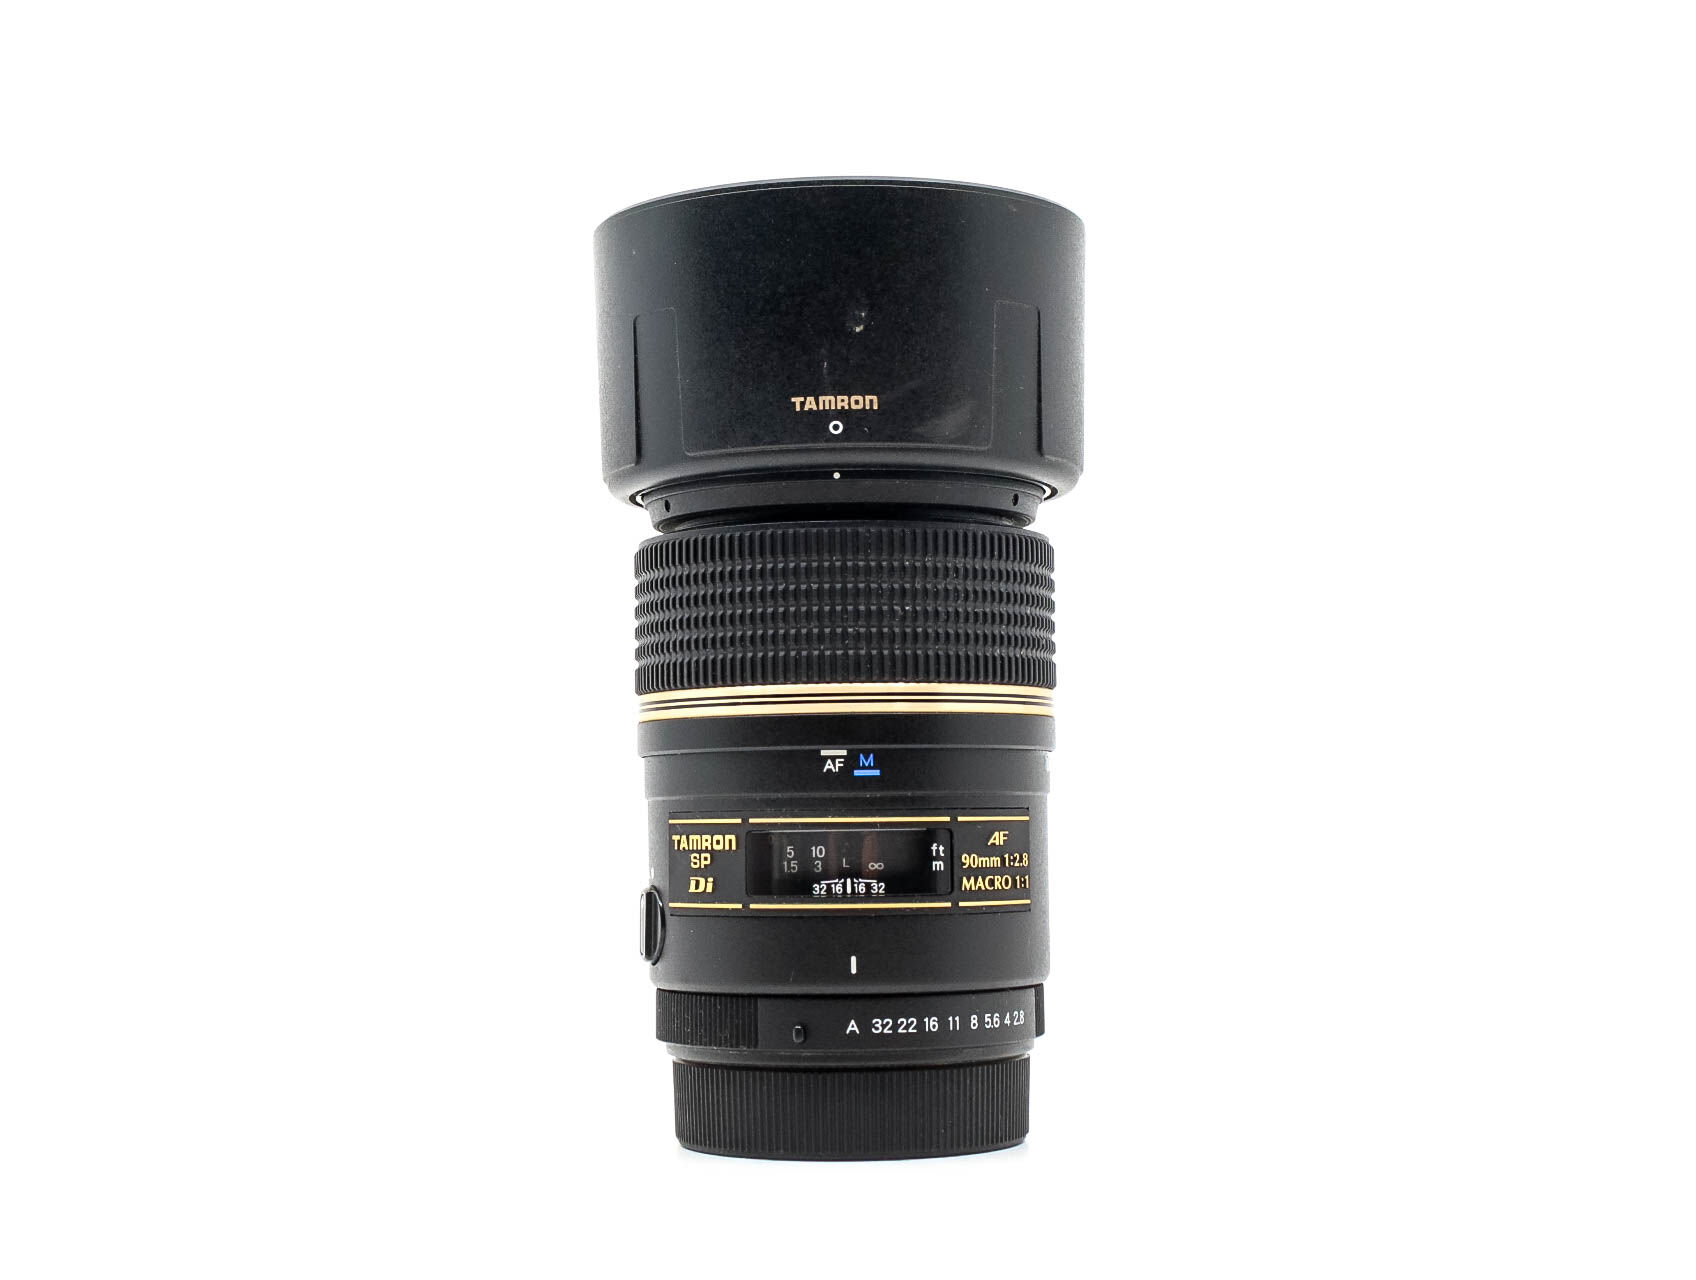 tamron sp af 90mm f/2.8 di macro pentax fit (condition: excellent)